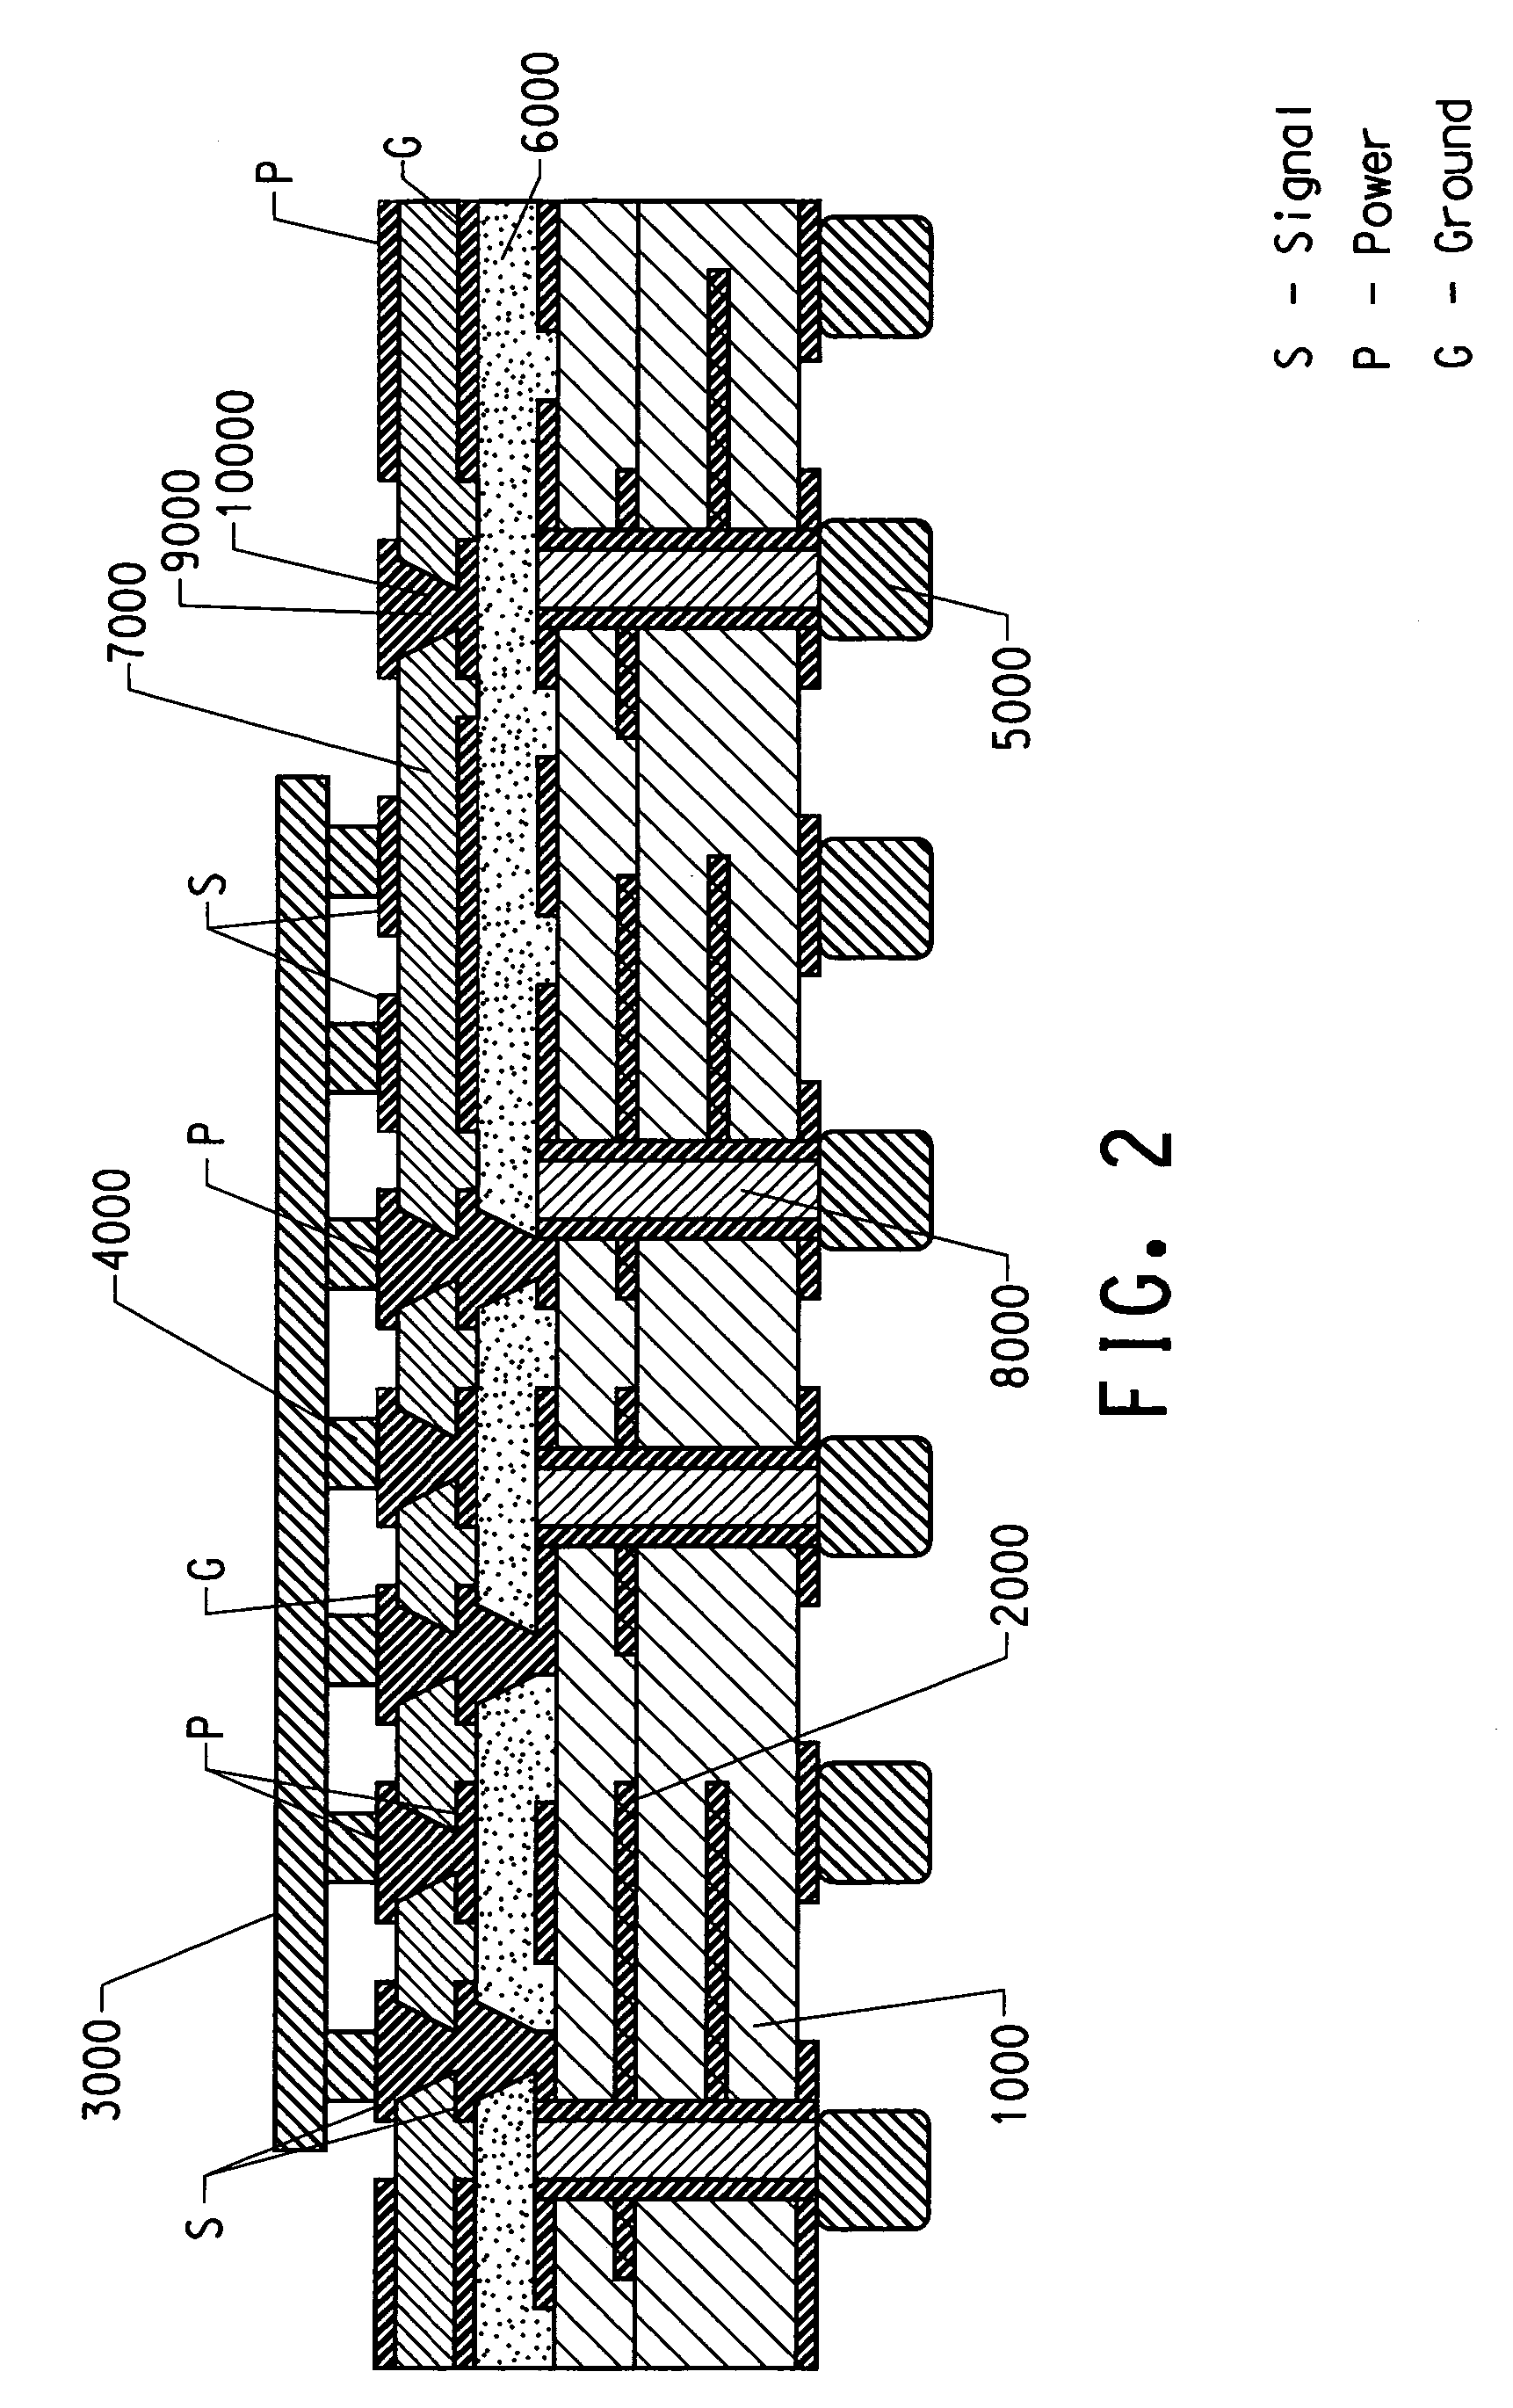 Capacitive devices, organic dielectric laminates, multilayer structures incorporating such devices, and methods of making thereof